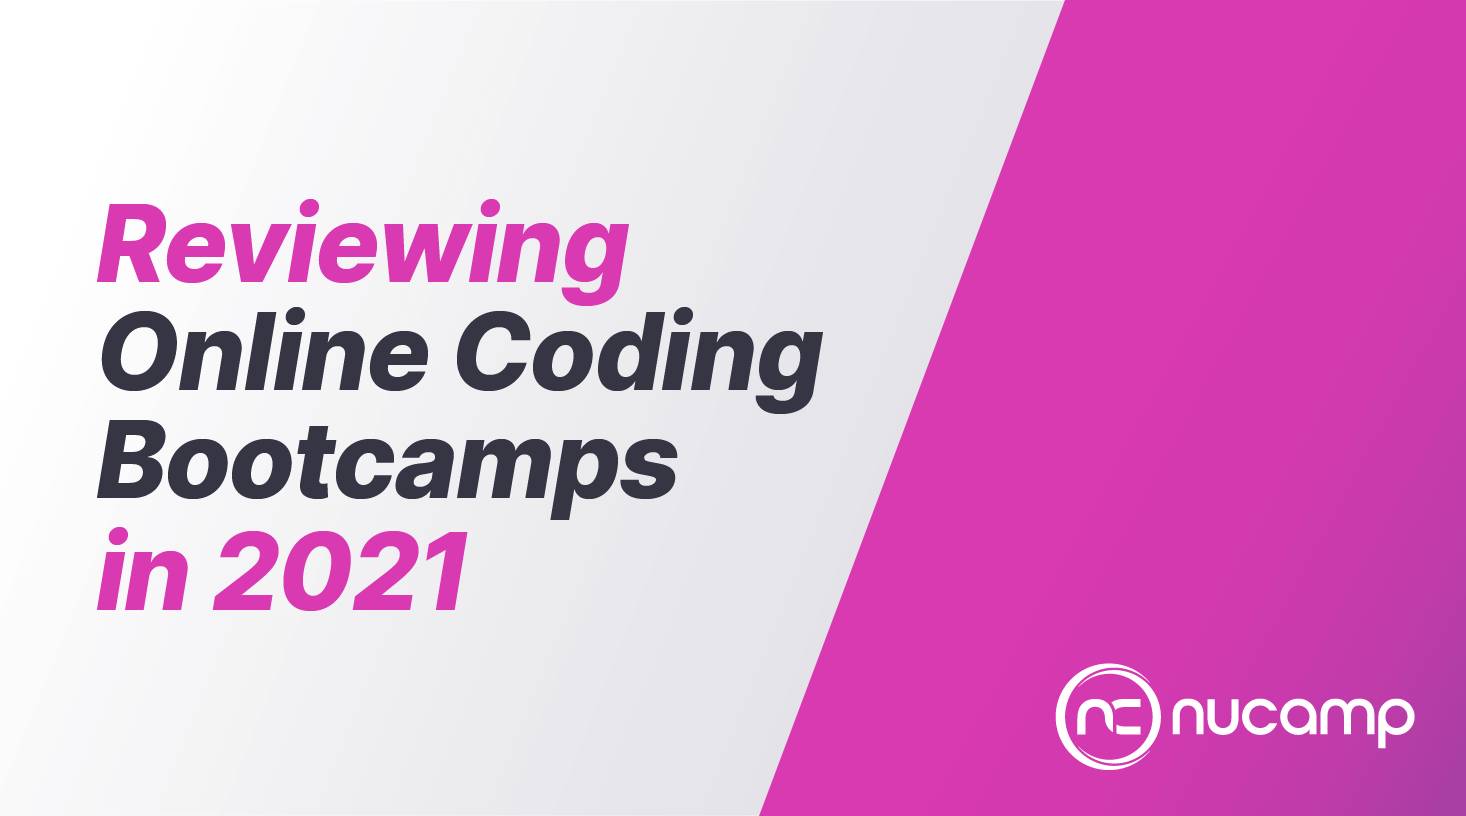 Nucamp Reviewing Online Coding Bootcamps in 2022